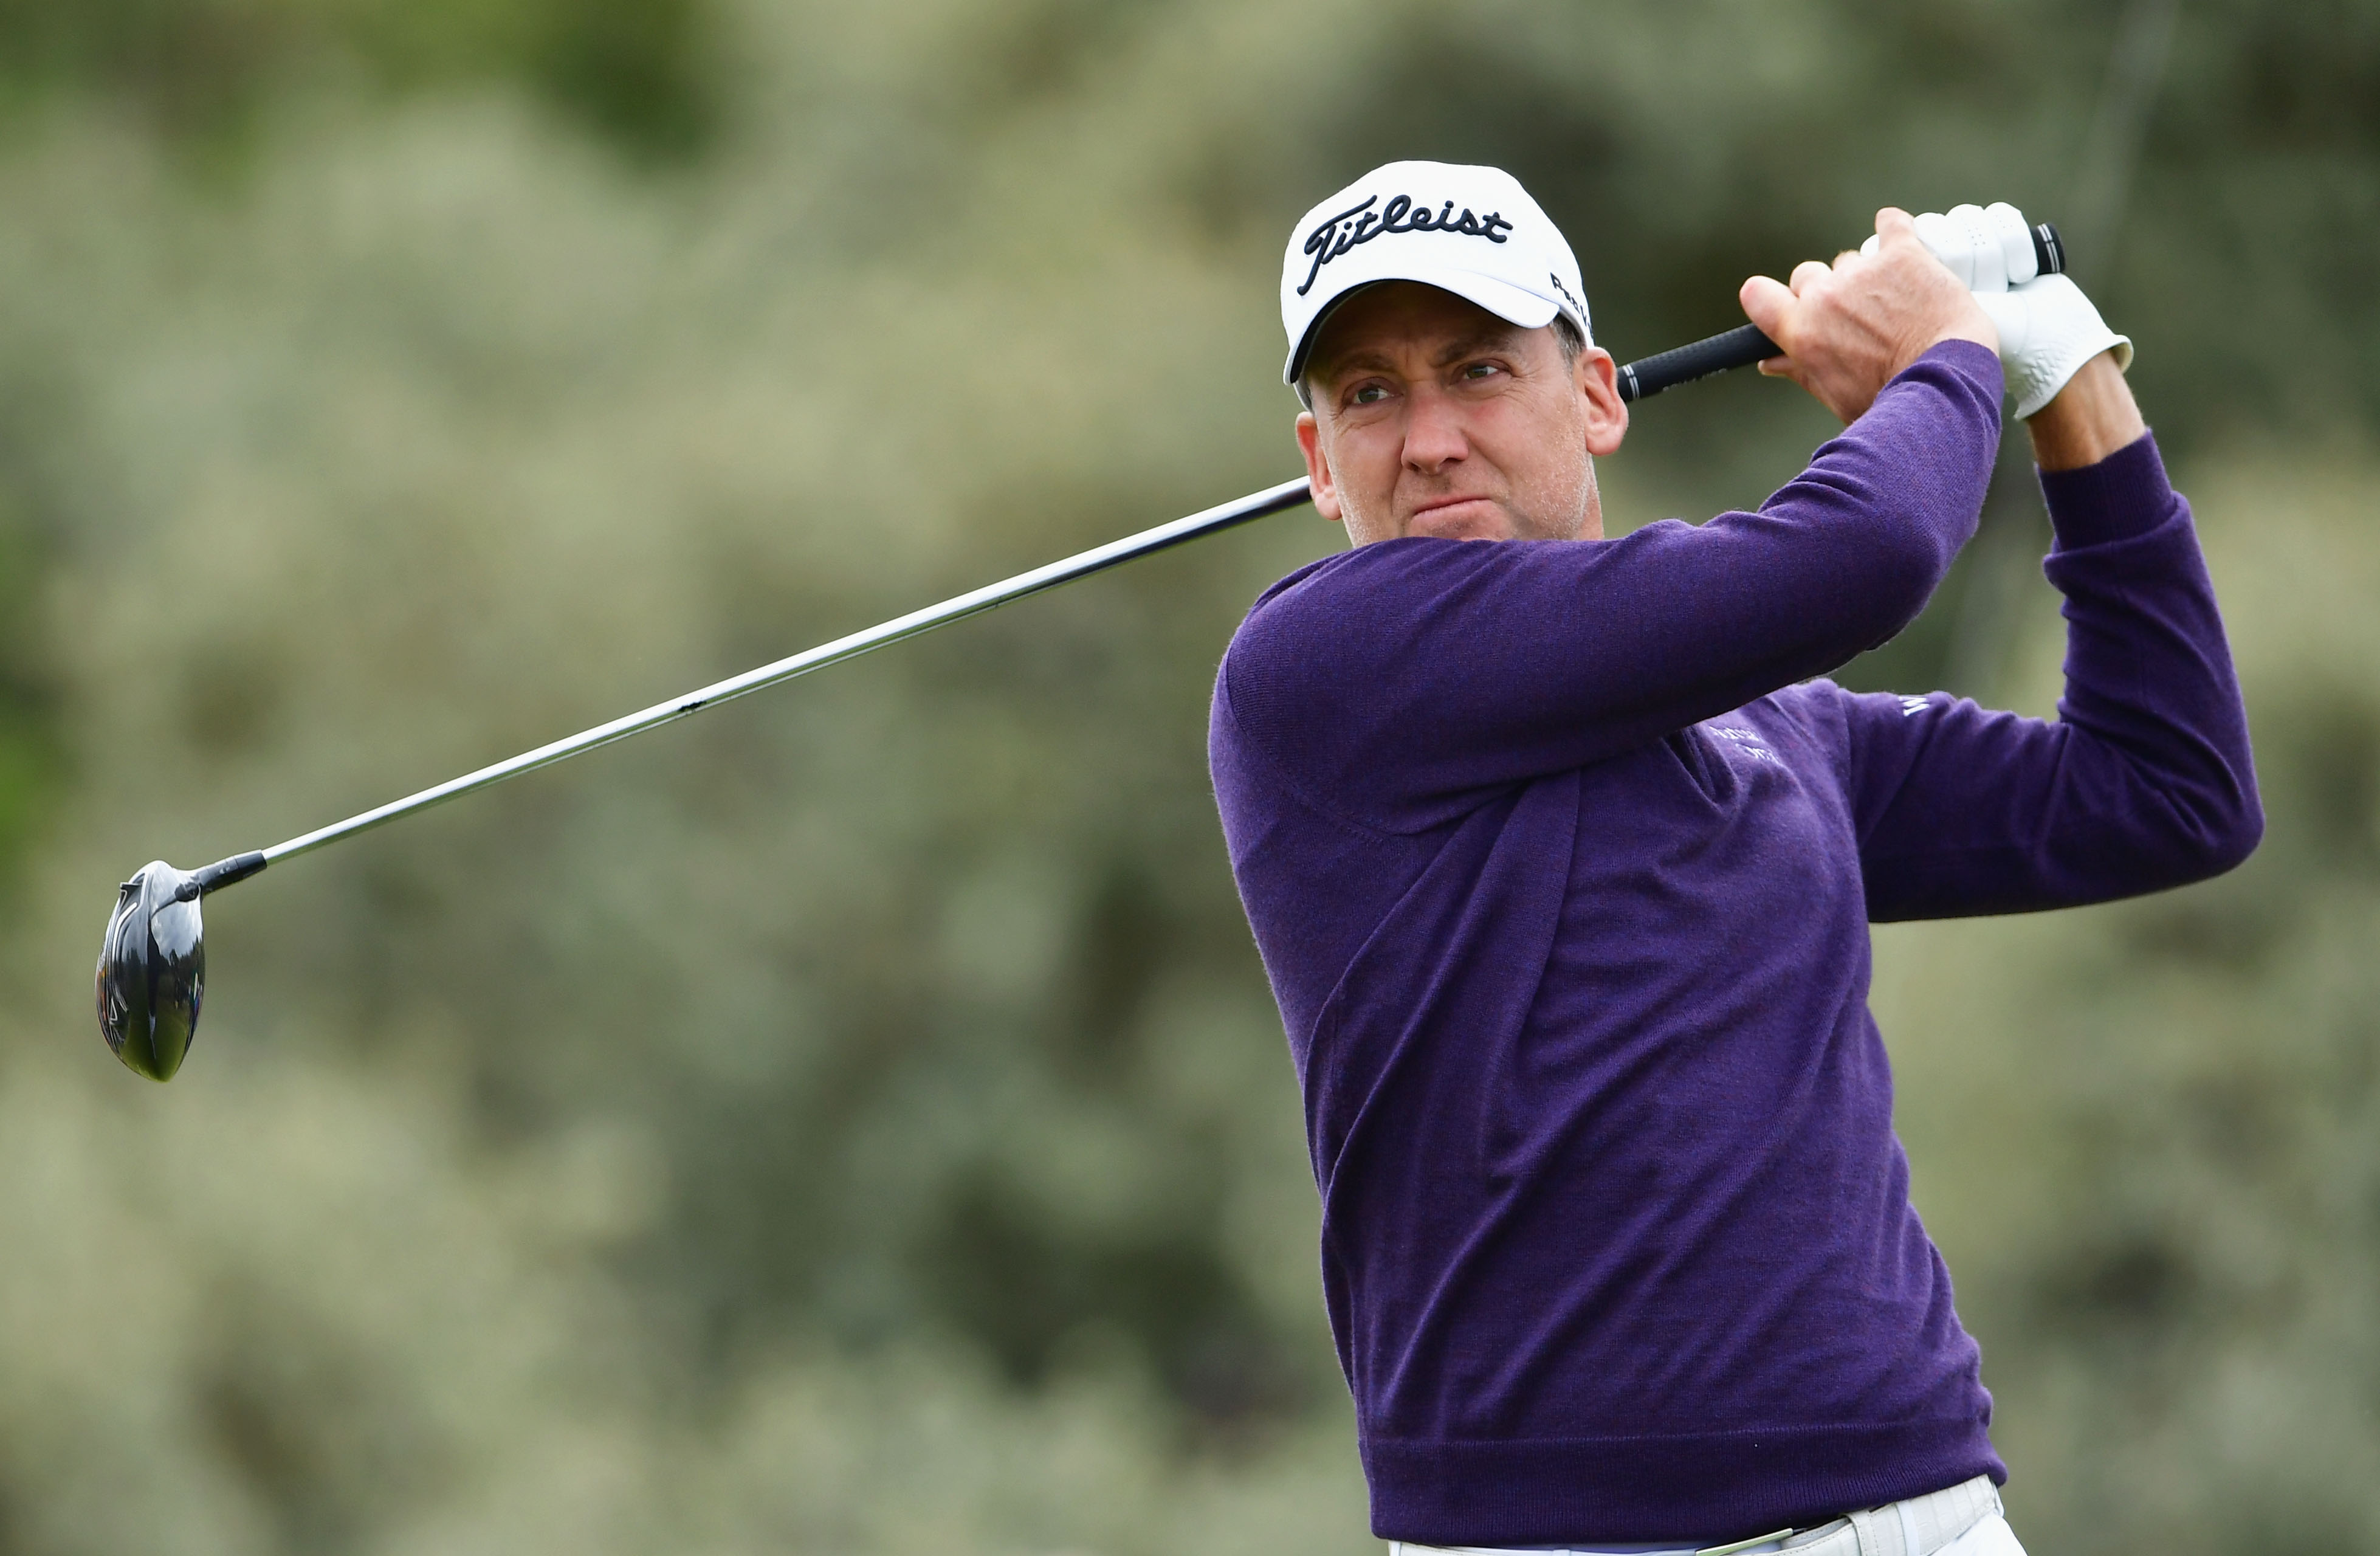 Ian Poulter Plays His Way Into Contention